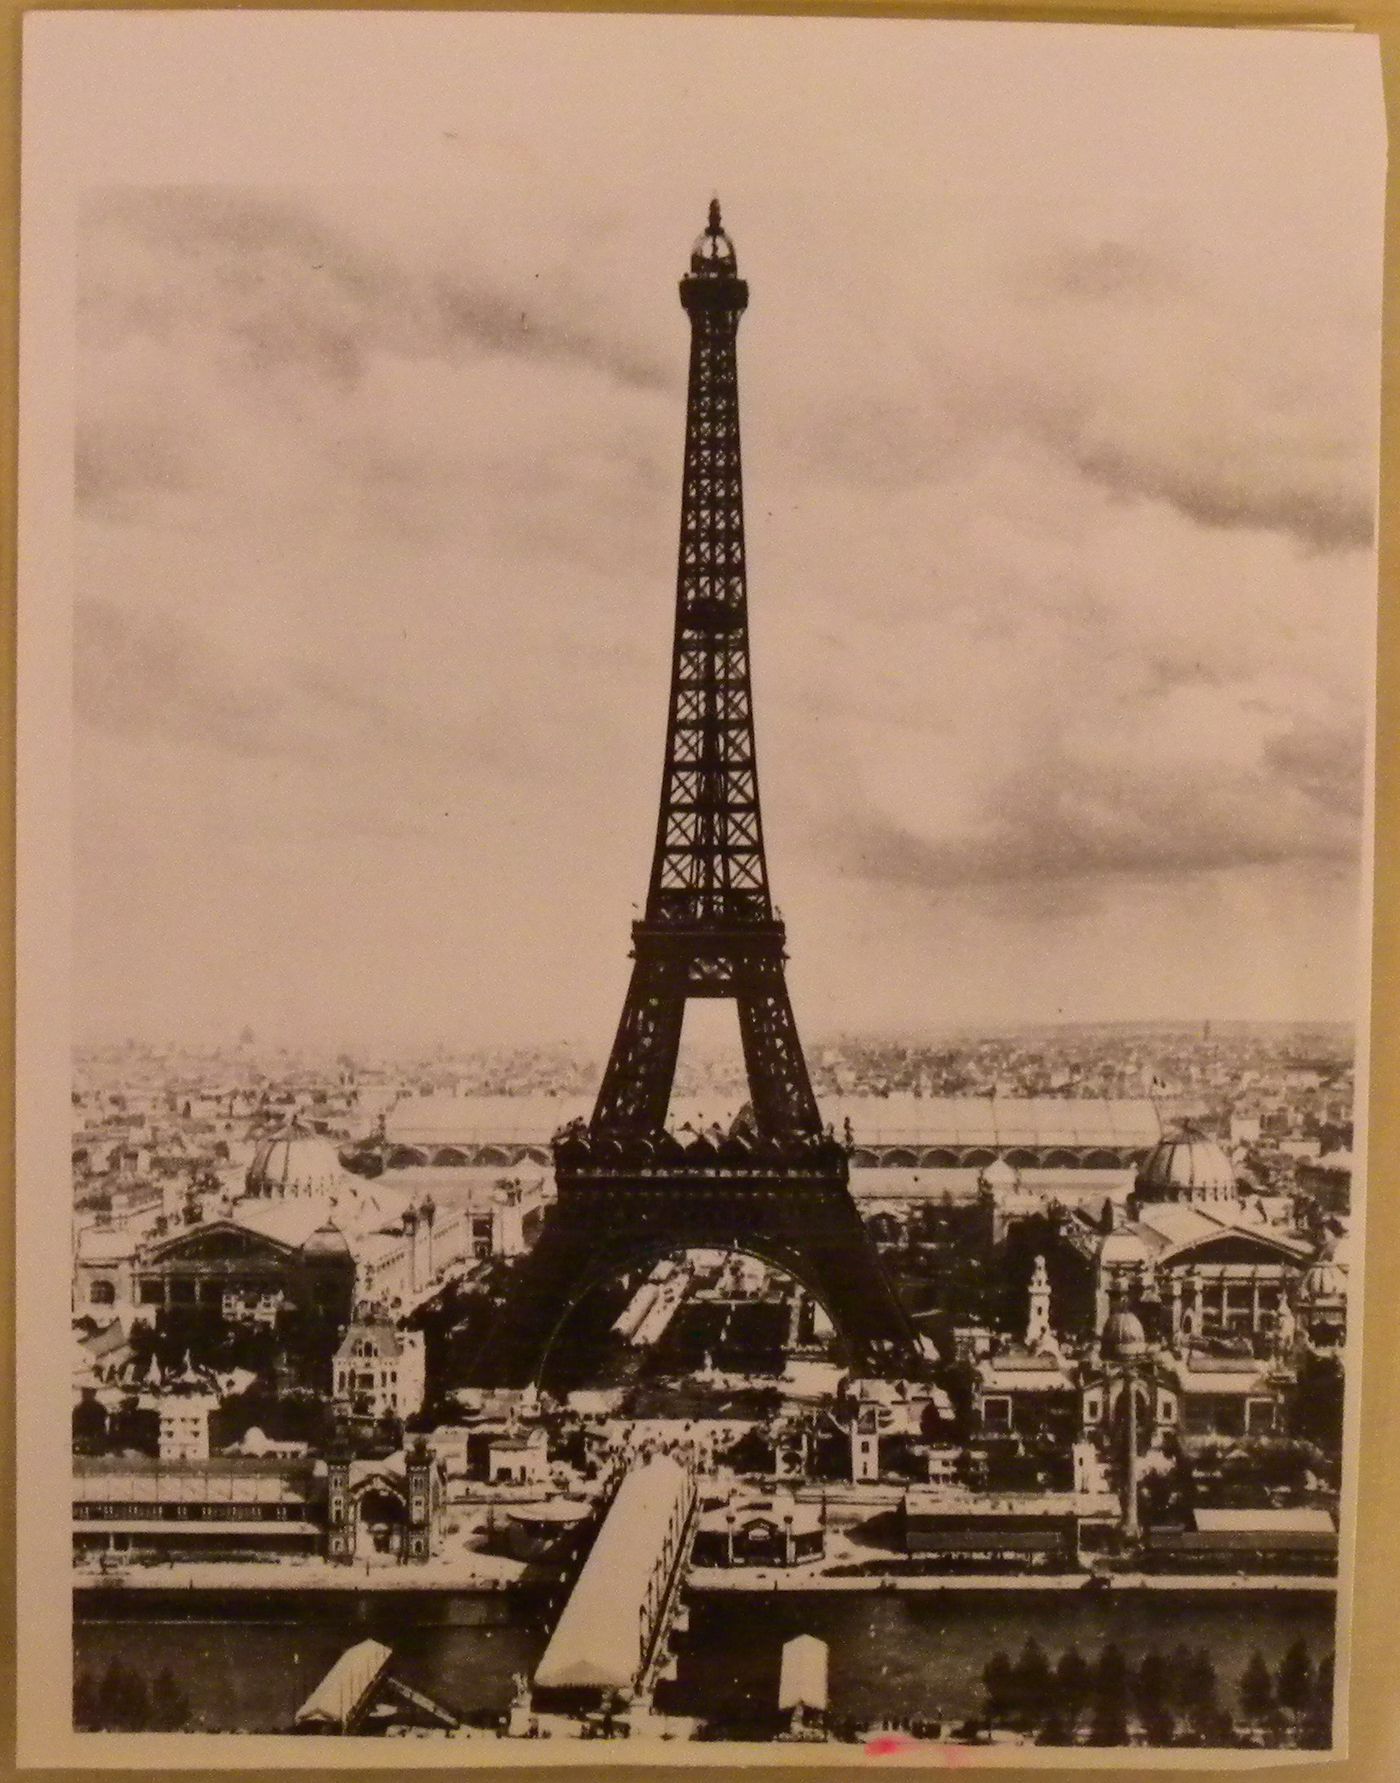 View of the Eiffel Tower, Exposition Universelle of 1889, Paris, France